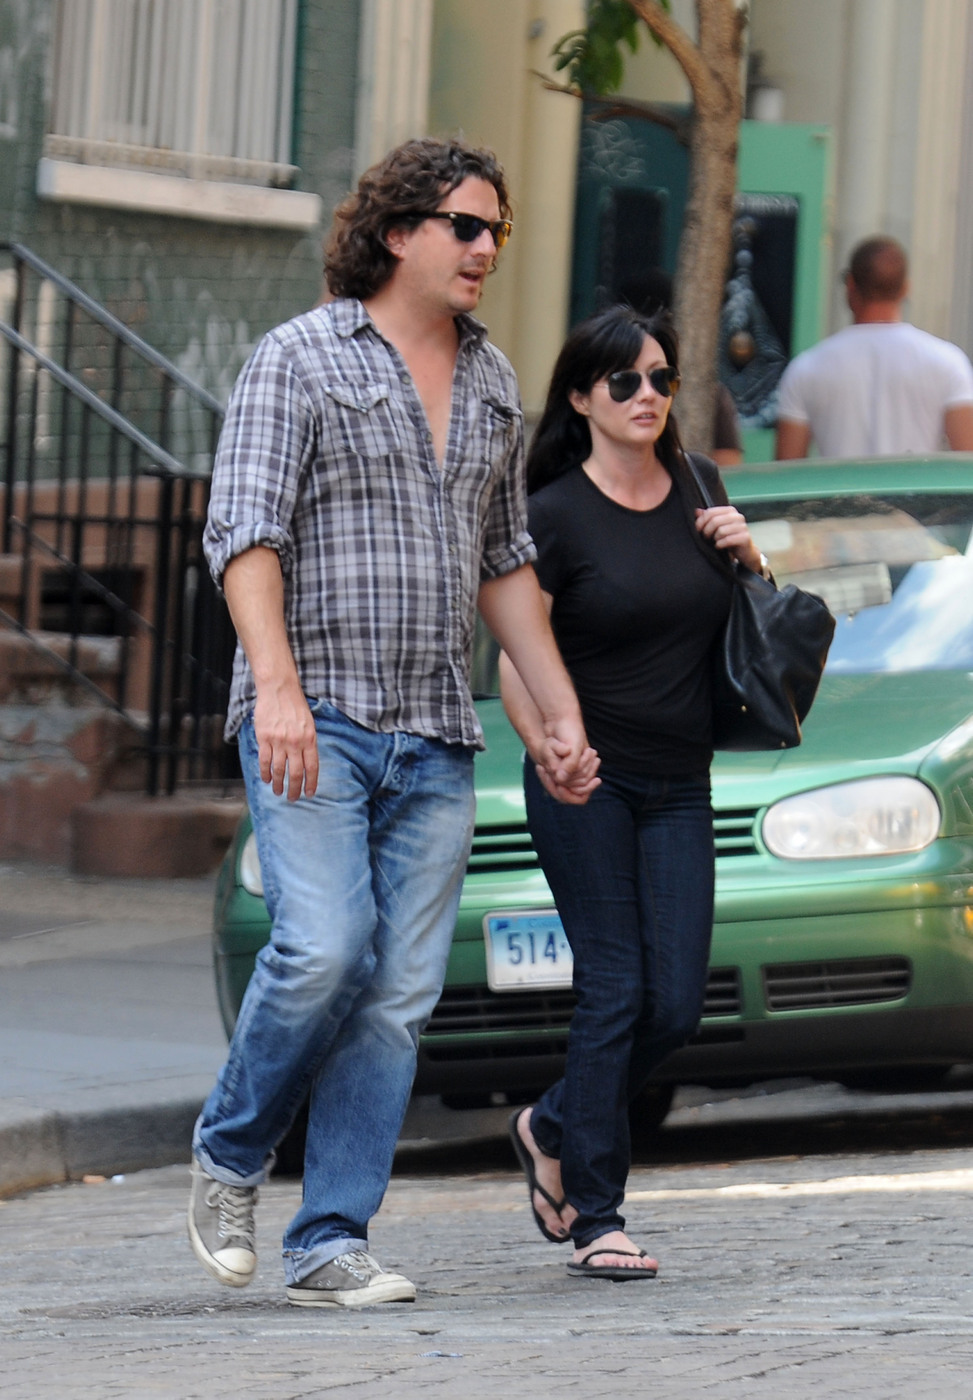 43147, NEW YORK, NEW YORK - Saturday July 31, 2010. Is Shannen Doherty pregnant? The actress is seen looking a bit heavier set while holding hands with photographer boyfriend Kurt Iswarienko in NYC. **FRANCE, AUSTRALIA, NEW ZEALAND AND EASTERN EUROPE OUT** Photograph: © Hector Vallenilla, PacificCoastNews.com**FEE MUST BE AGREED PRIOR TO USAGE** **E-TABLET/IPAD & MOBILE PHONE APP PUBLISHING REQUIRES ADDITIONAL FEES** UK OFFICE:+44 131 557 7760/7761 US OFFICE:1 310 261 9676